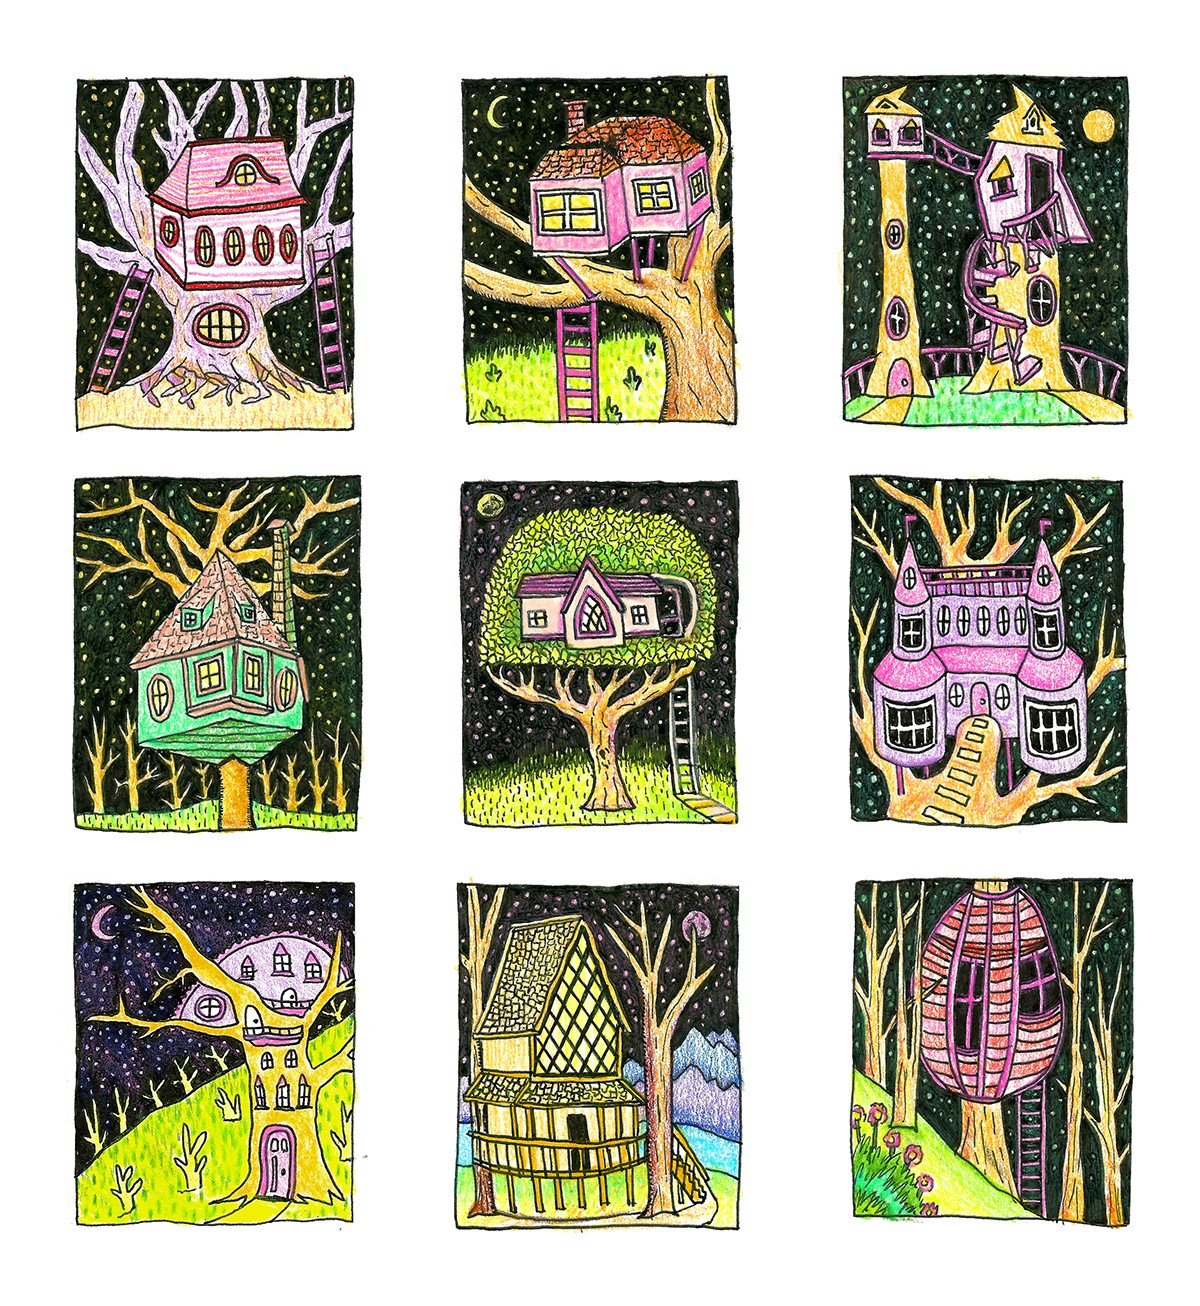 https://www.doodlersanonymous.com/wp-content/uploads/2022/07/2541_colored-pencil-treehouse-series_3786.jpg